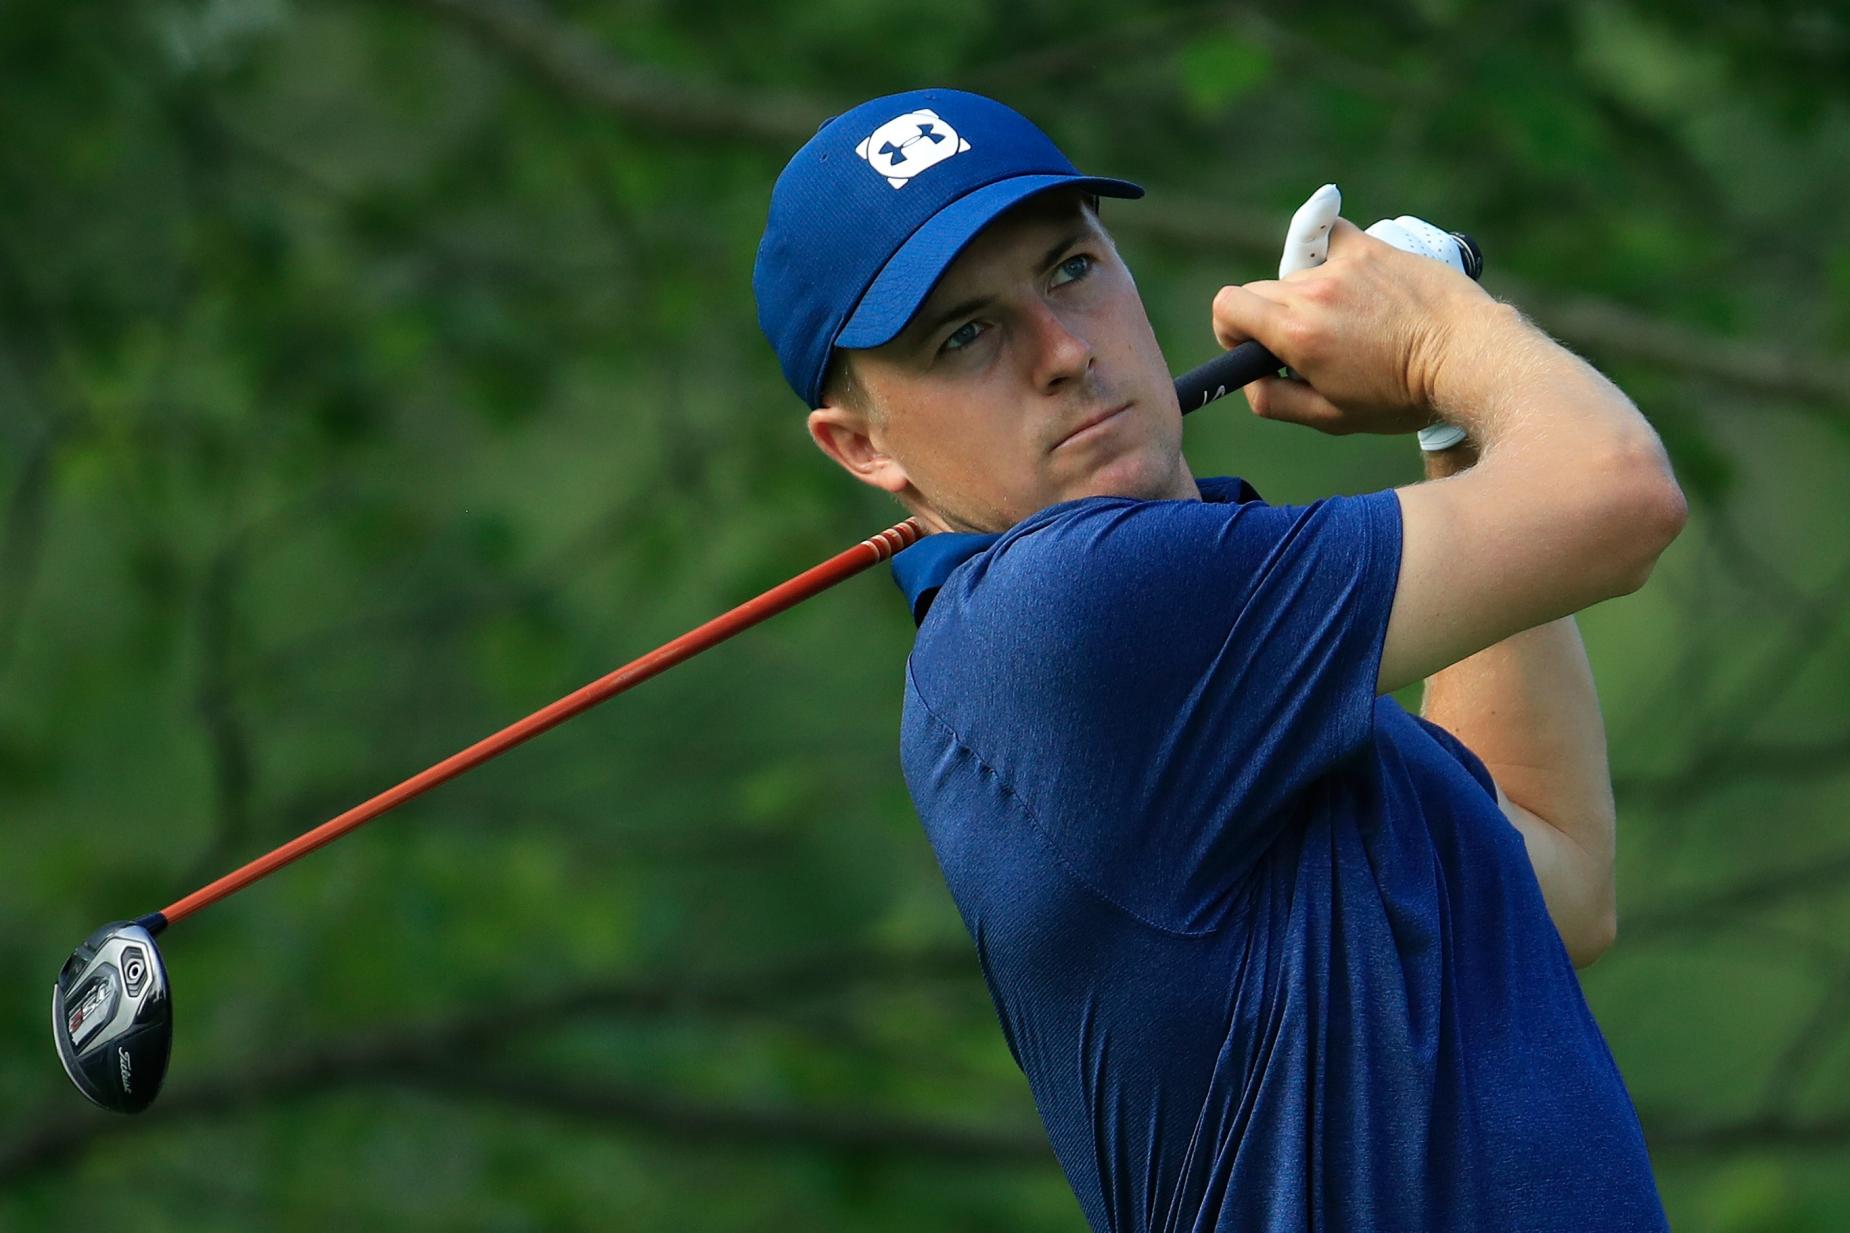 Jordan Spieth commits to first career PGA Tour fall event in the U.S